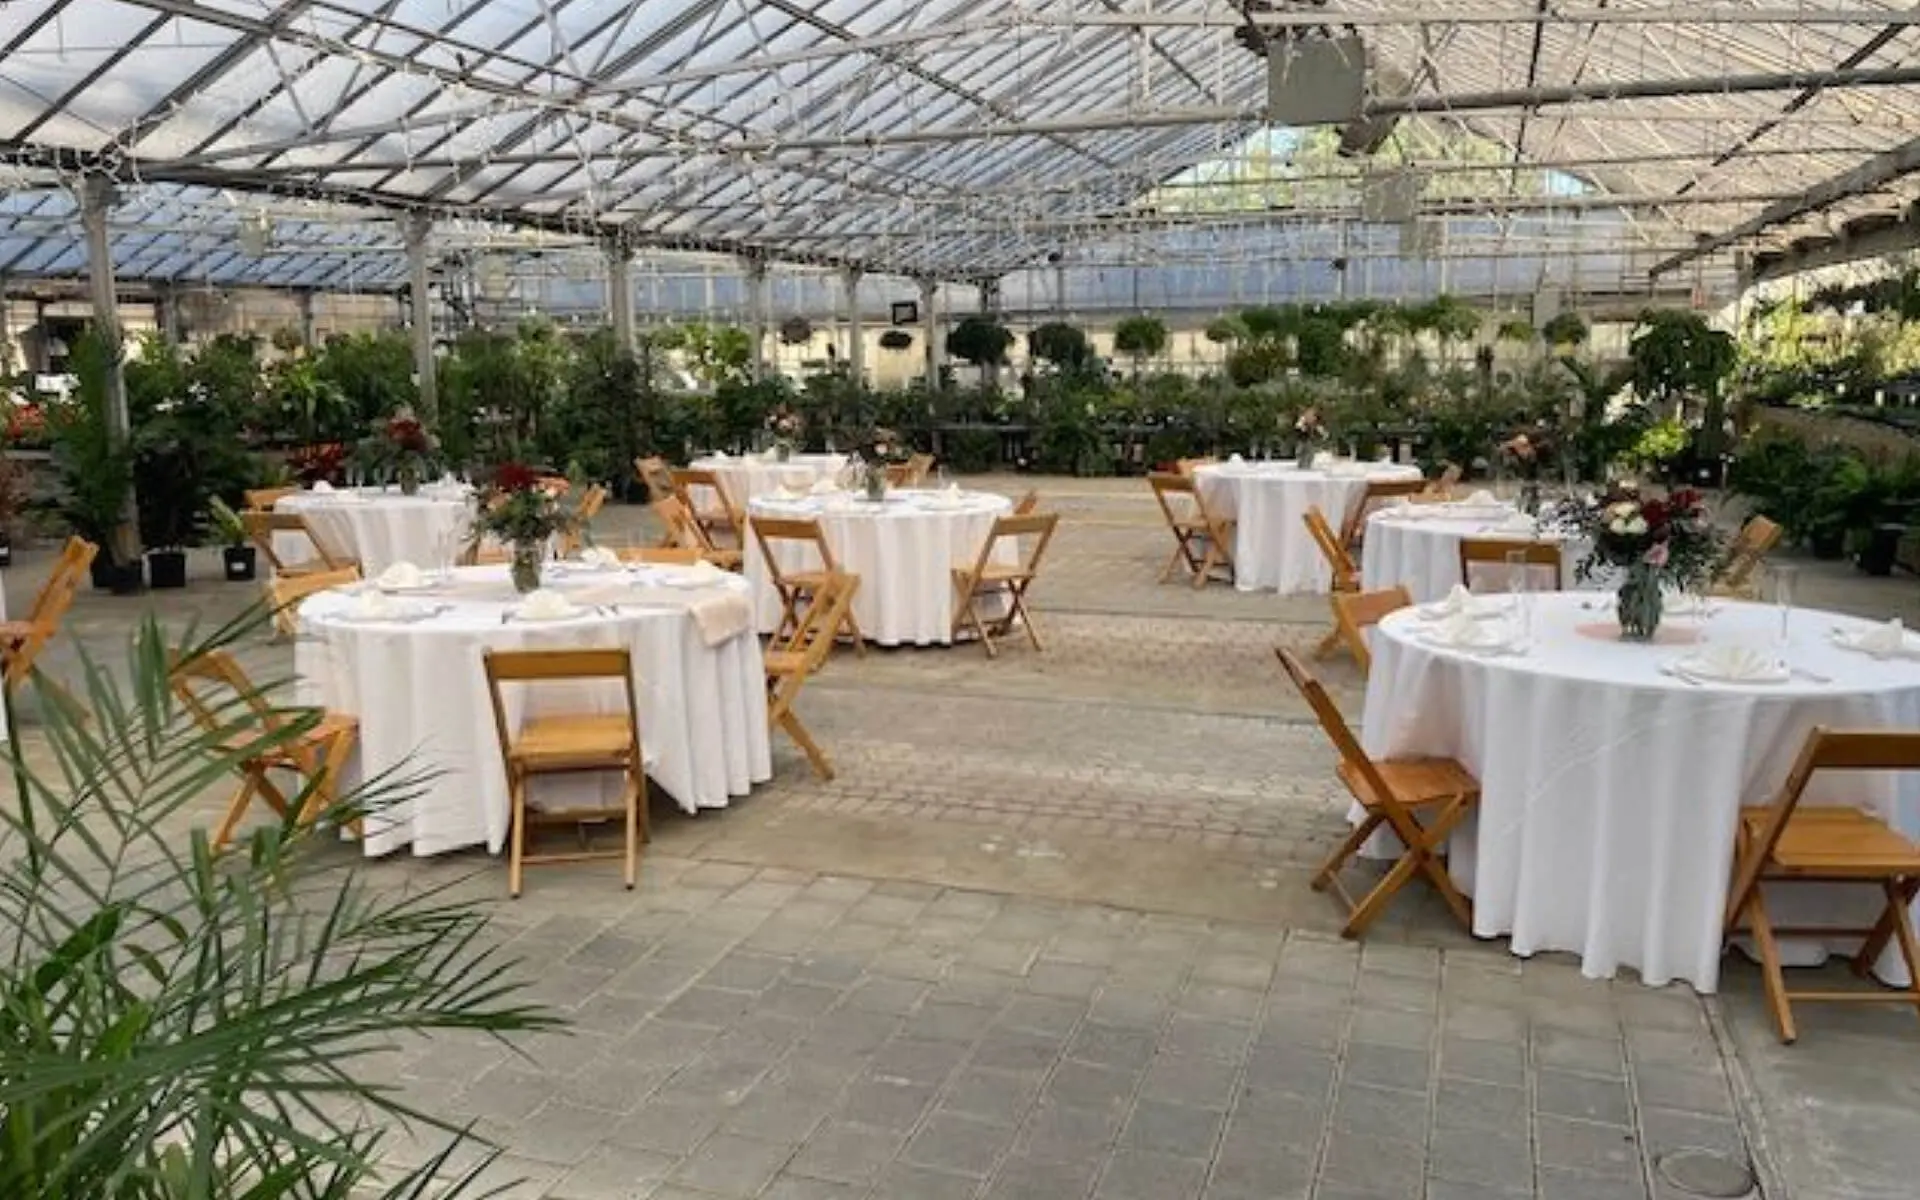 A large room with tables and chairs in it